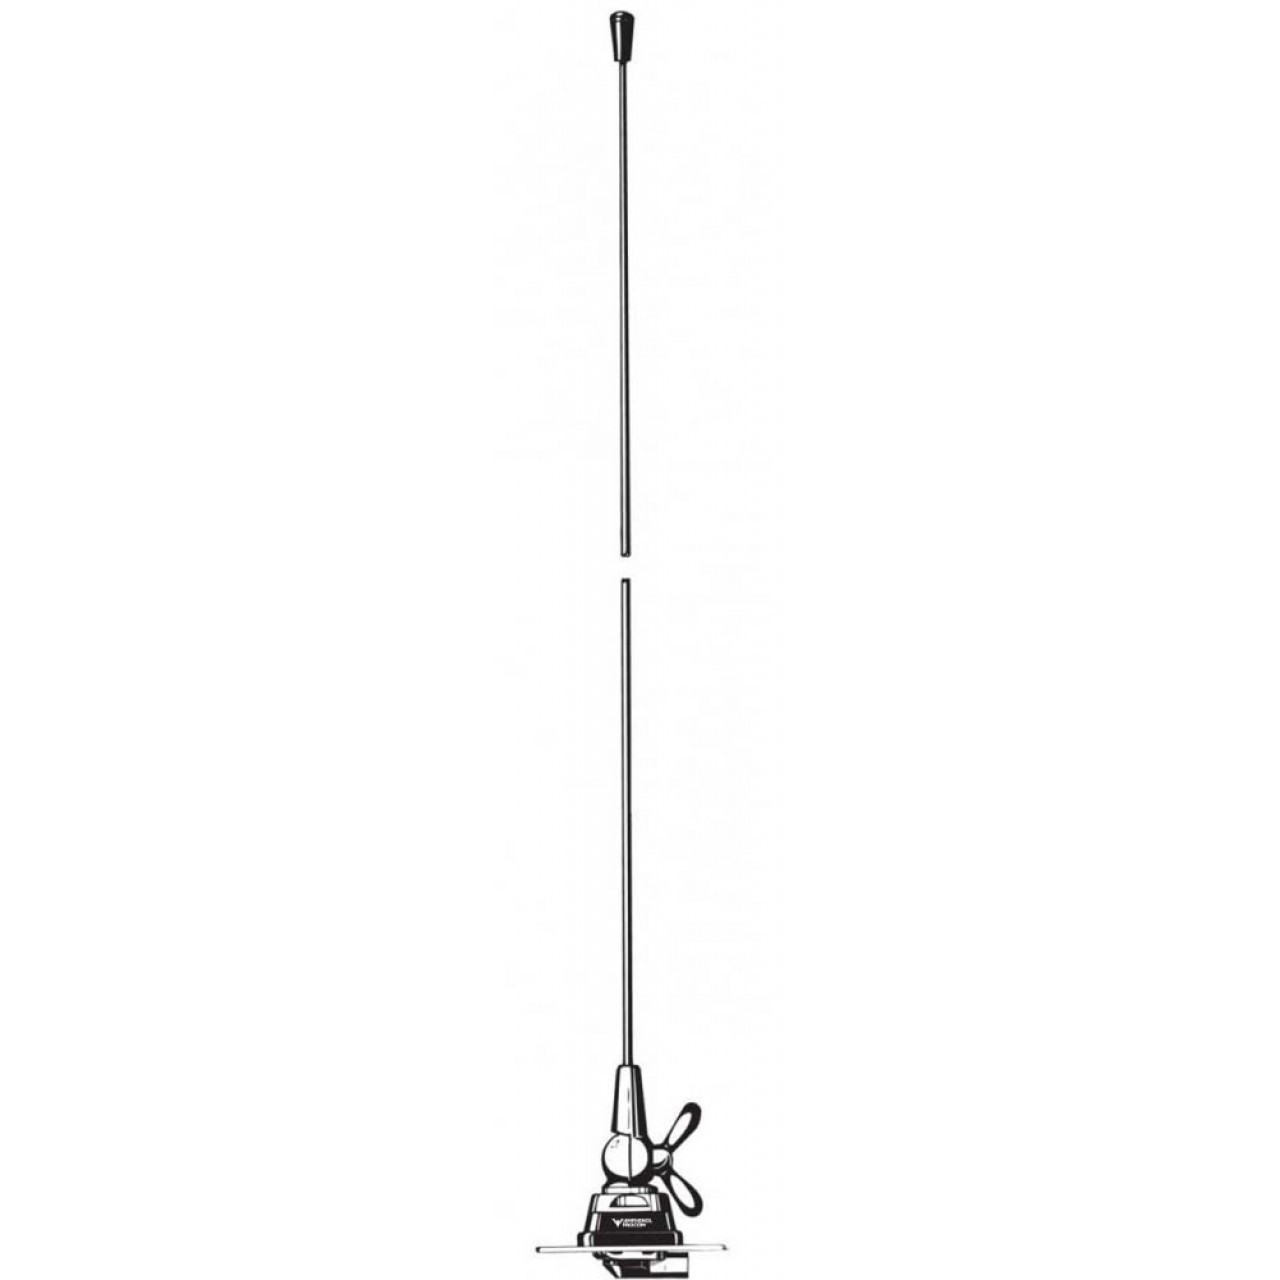 Antenne fouet multi-bande 80-175MH, ajustable